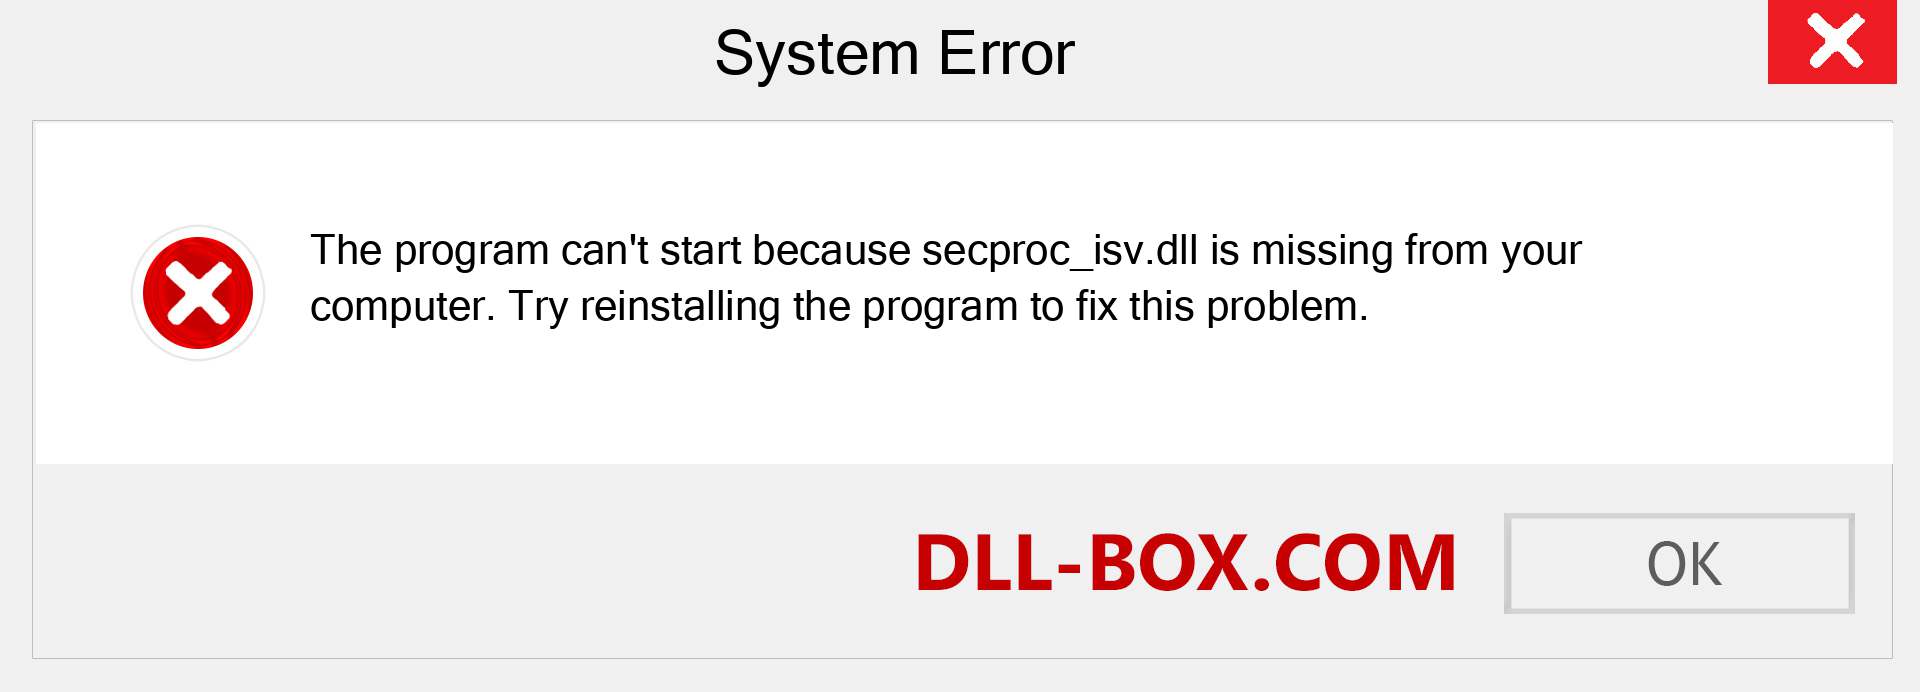  secproc_isv.dll file is missing?. Download for Windows 7, 8, 10 - Fix  secproc_isv dll Missing Error on Windows, photos, images